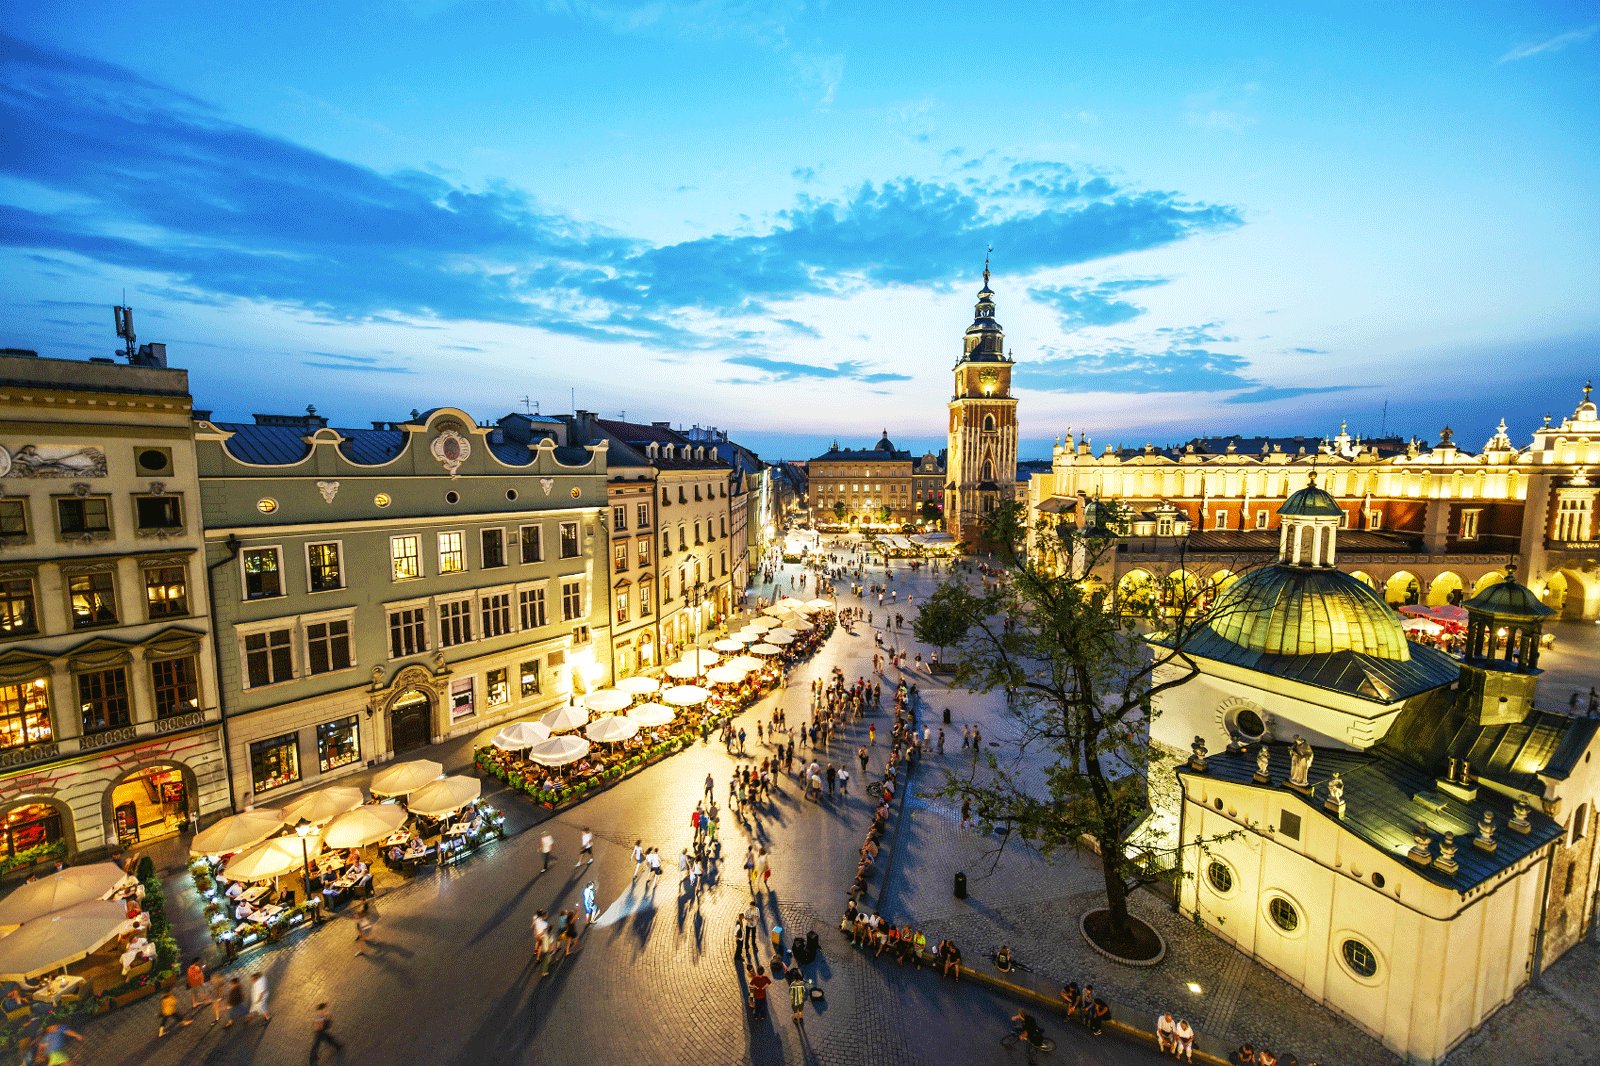 How to walk down the Royal road in Krakow